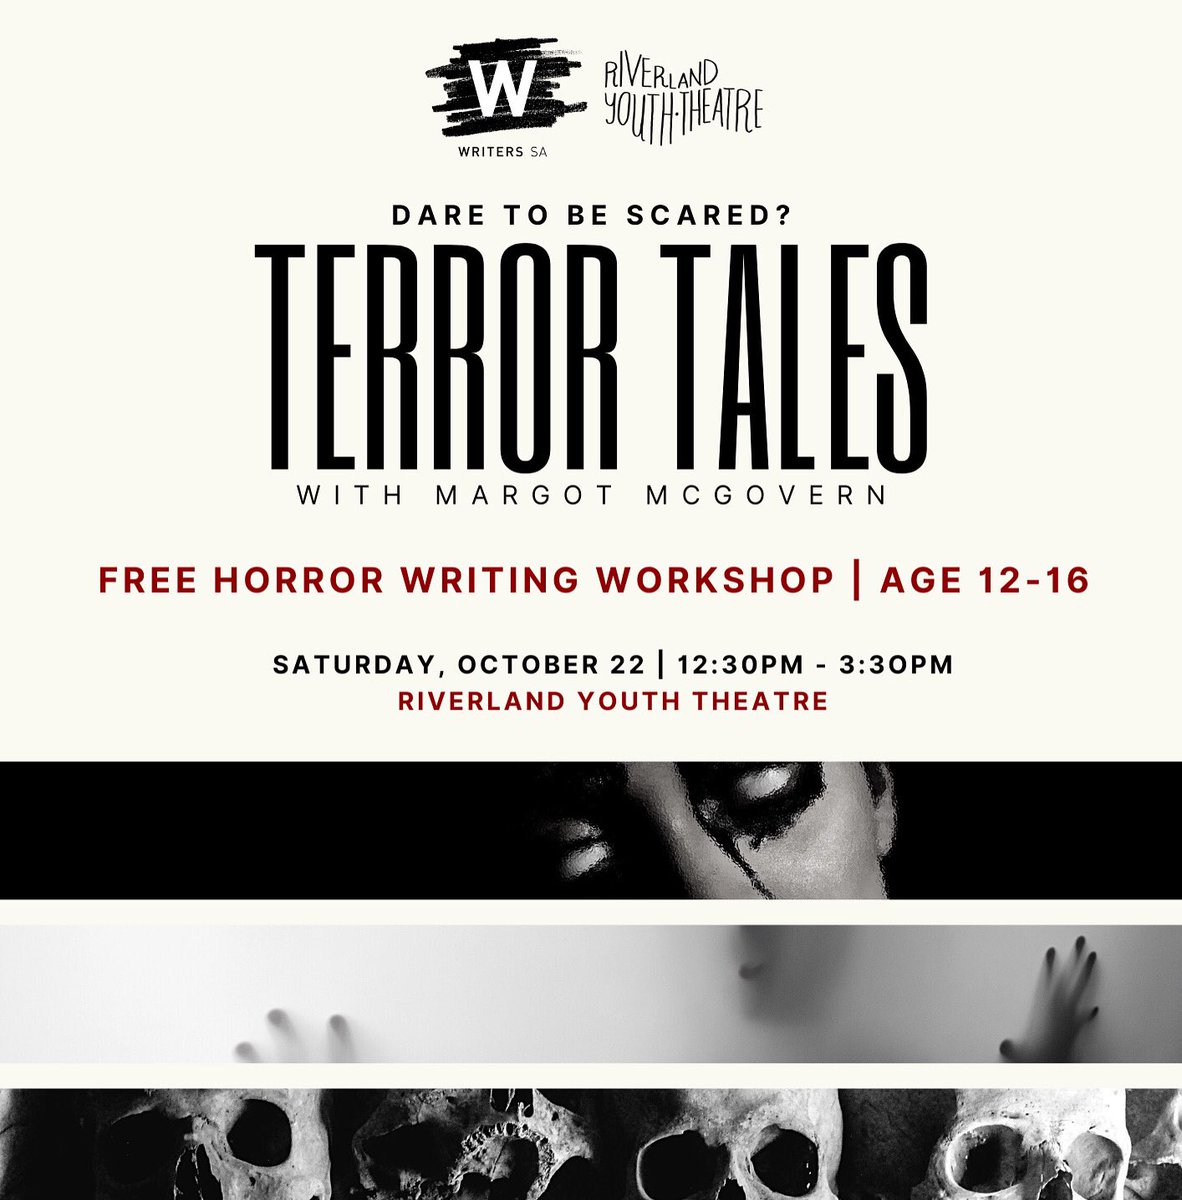 🎃 Looking forward to spooky fun with @writerssainc in #Riverland this weekend! 🎃 If you know teen writers in the region, there are still places available and we’d love to have them along! 🥰👻